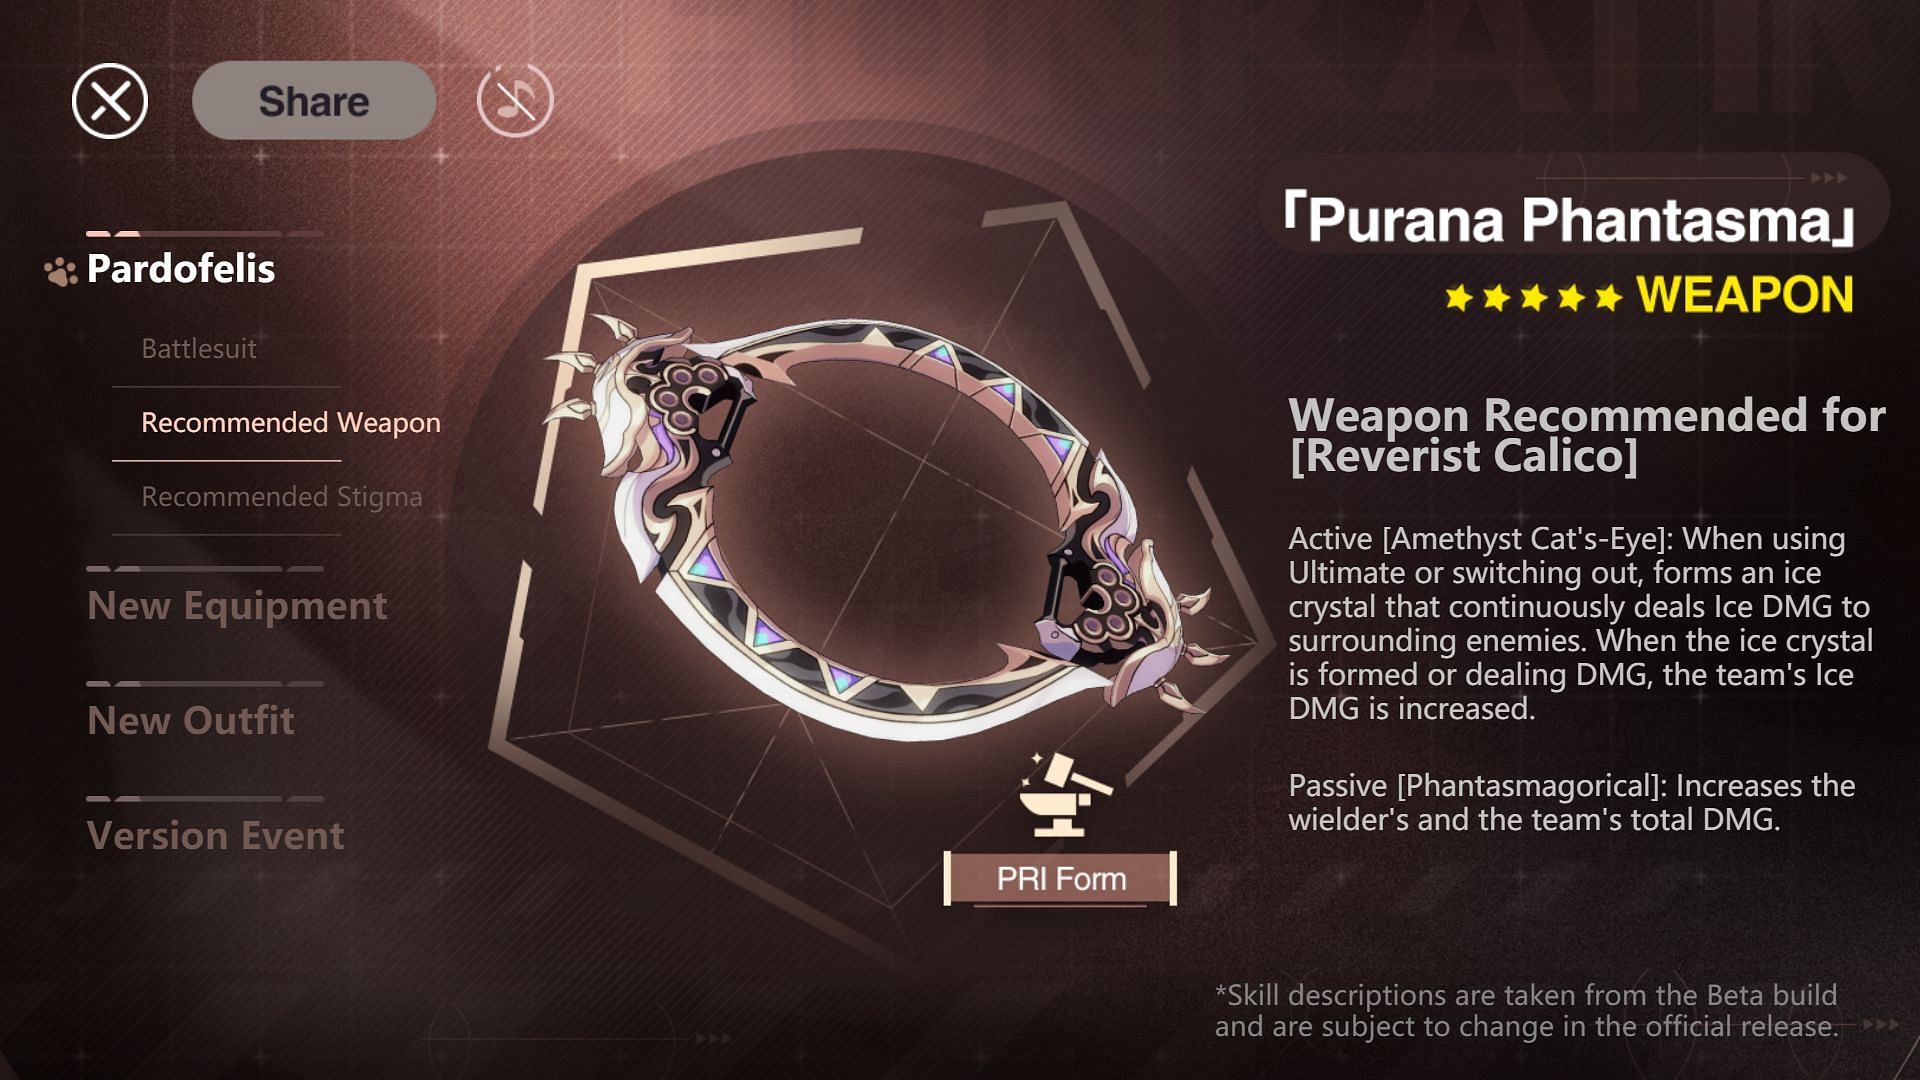 Recommended weapon for Pardofelis (Image via Hoyoverse)